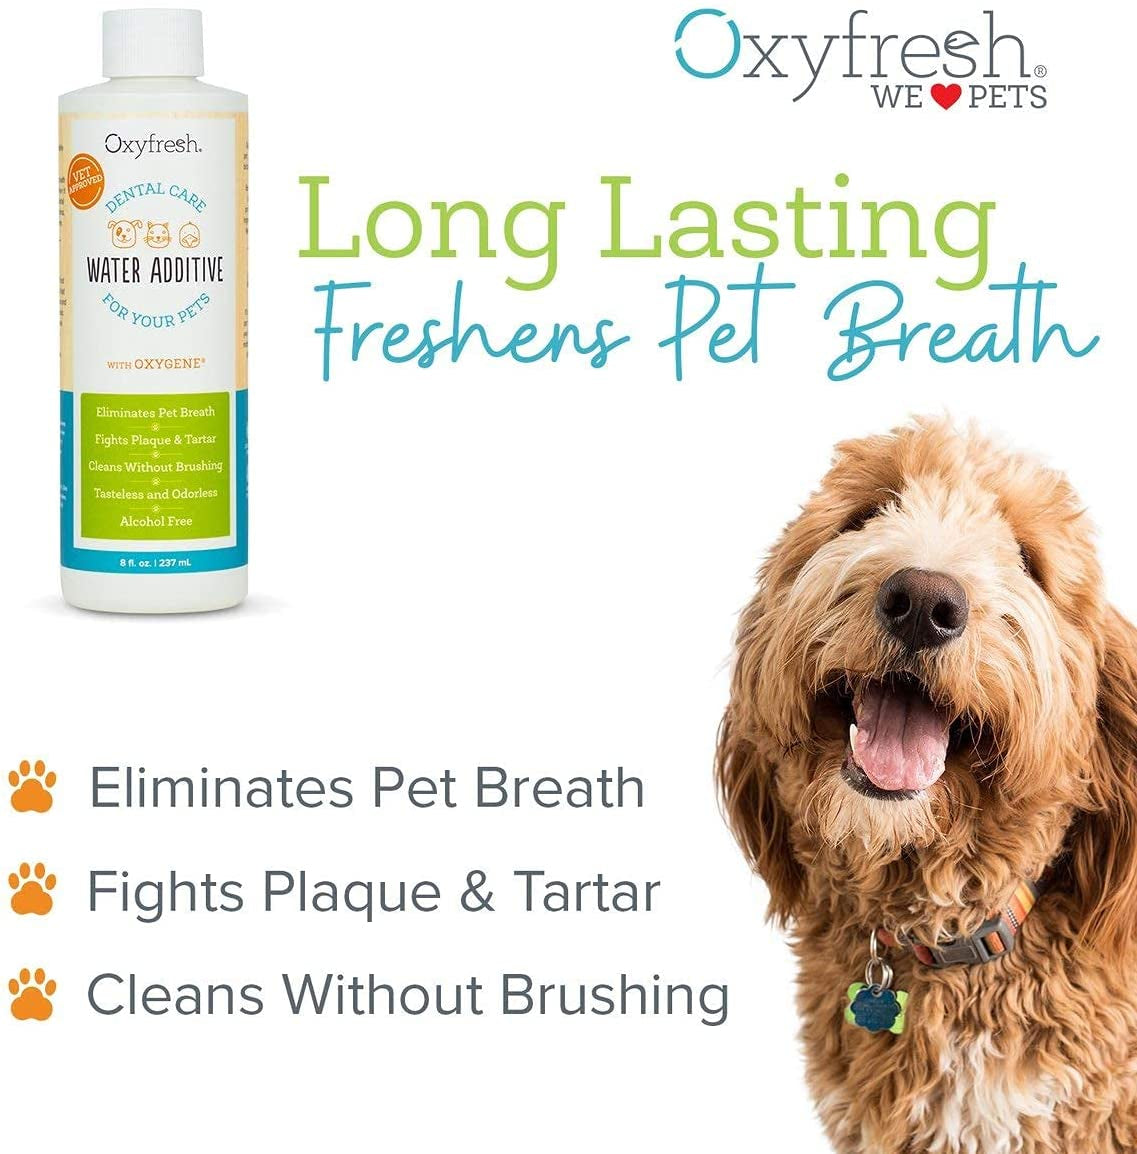 Premium Pet Dental Care Solution Pet Water Additive: Best Way to Eliminate Bad Dog Breath and Cat Bad Breath - Fights Tartar & Plaque - so Easy, Just Add to Water! Vet Recommended 16 Oz.